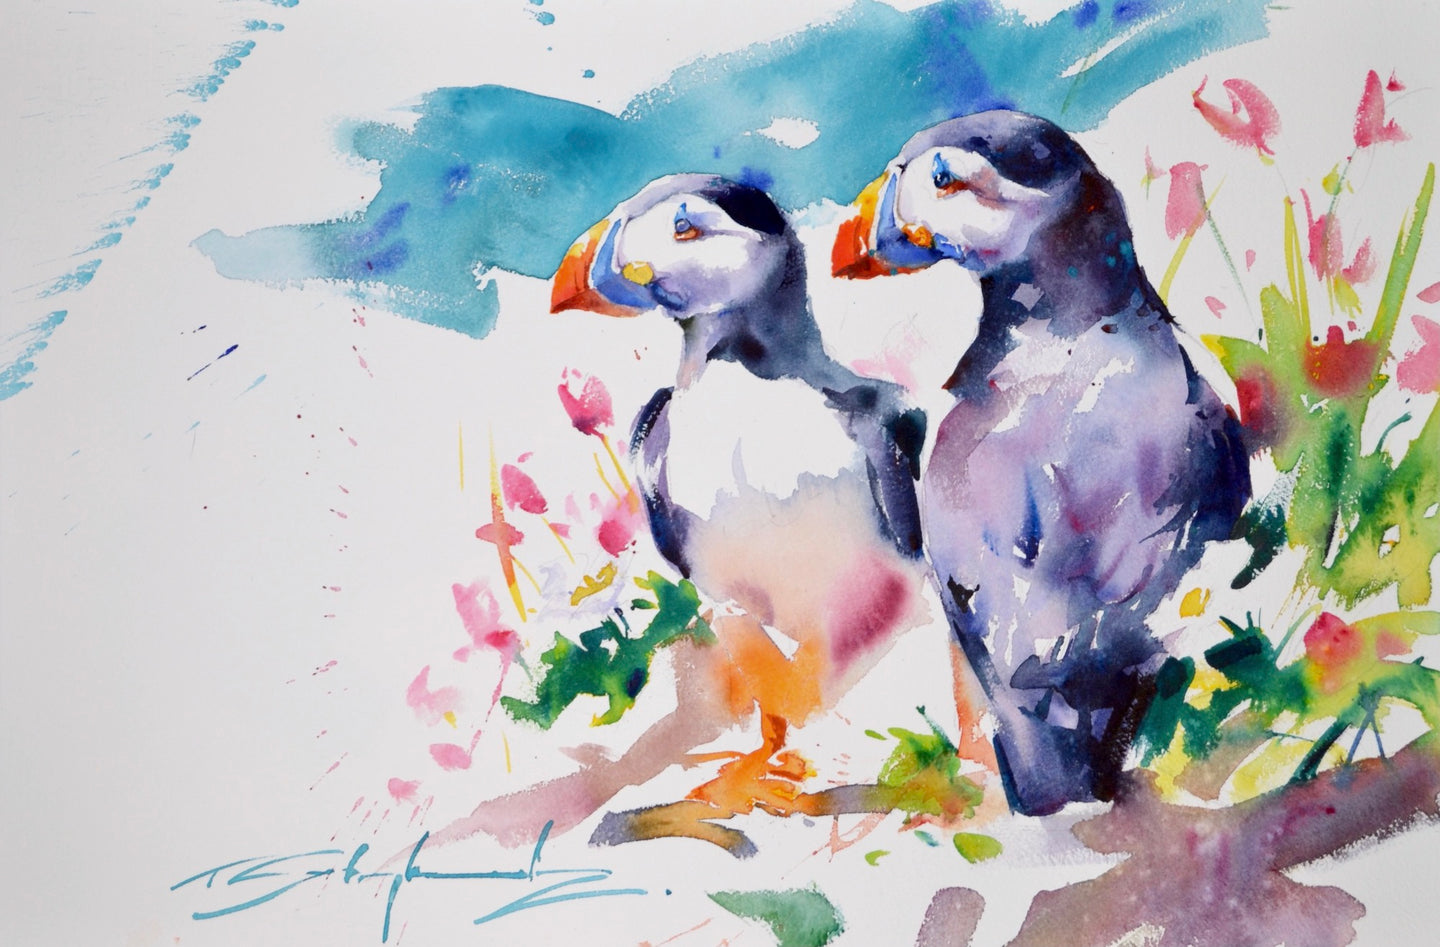 Close-up watercolour painting of a pair of Puffins standing in grass with wildflowers, by Tom Shepherd, unframed size 14 x 21 21.5